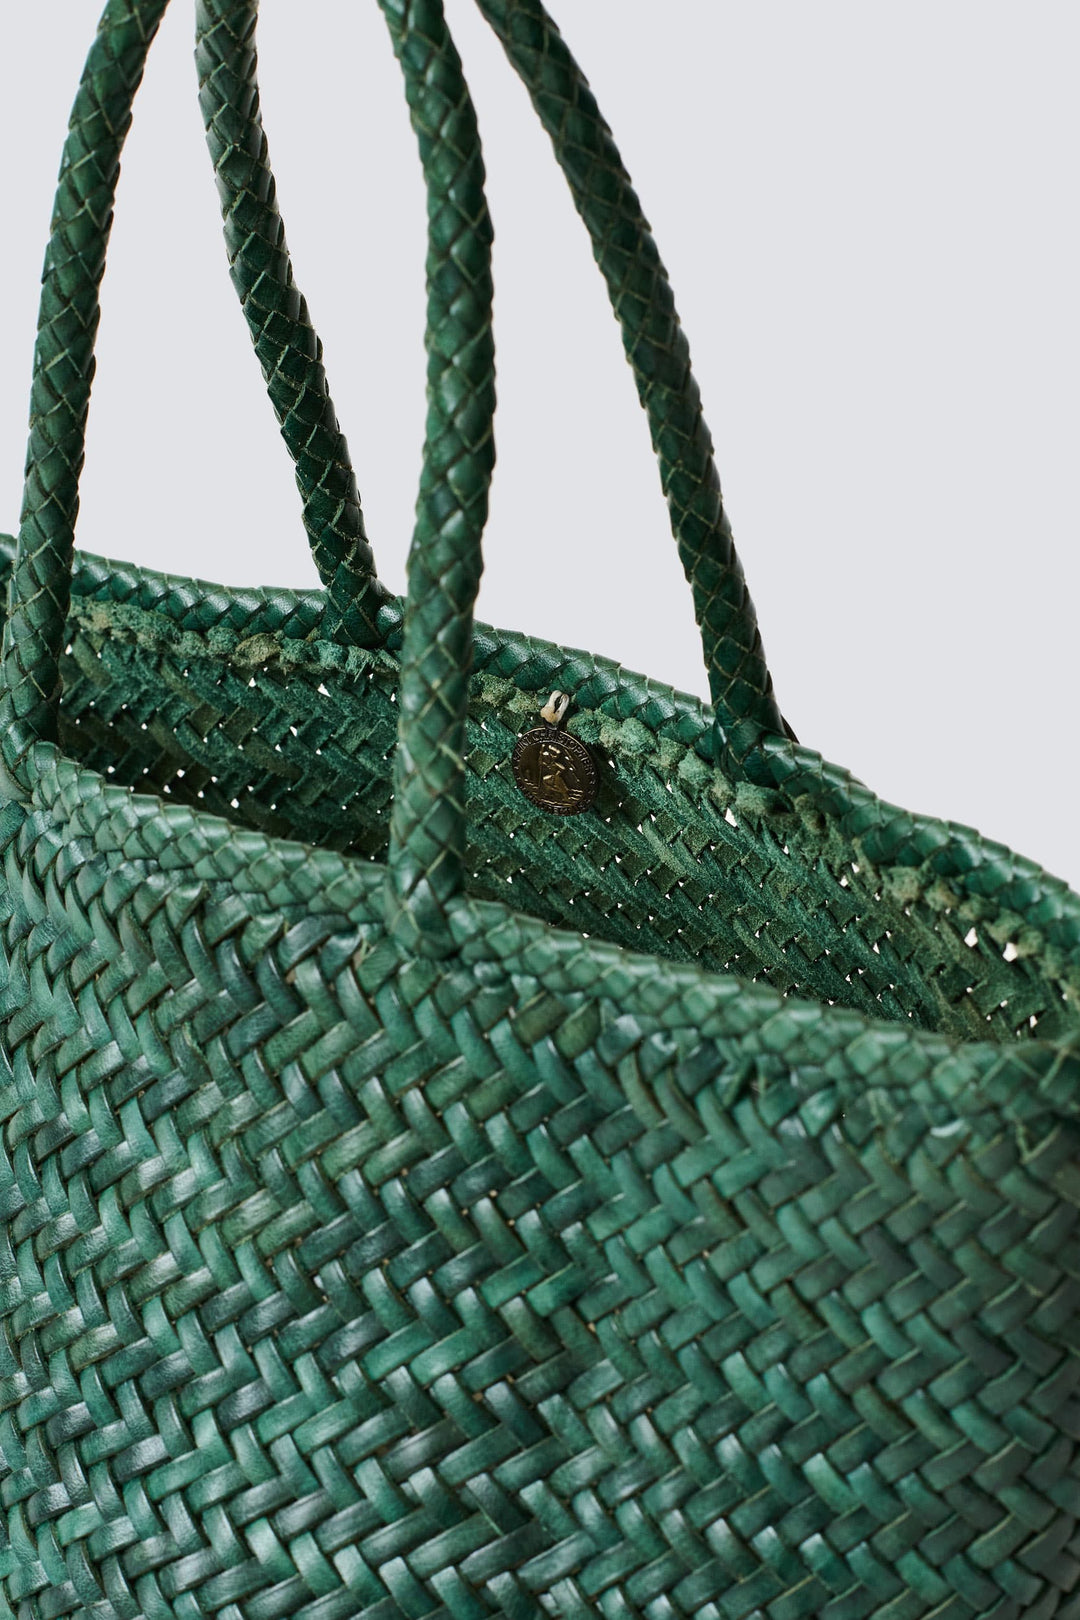 Dragon Diffusion Nantucket Large Woven-leather Basket Bag in Green